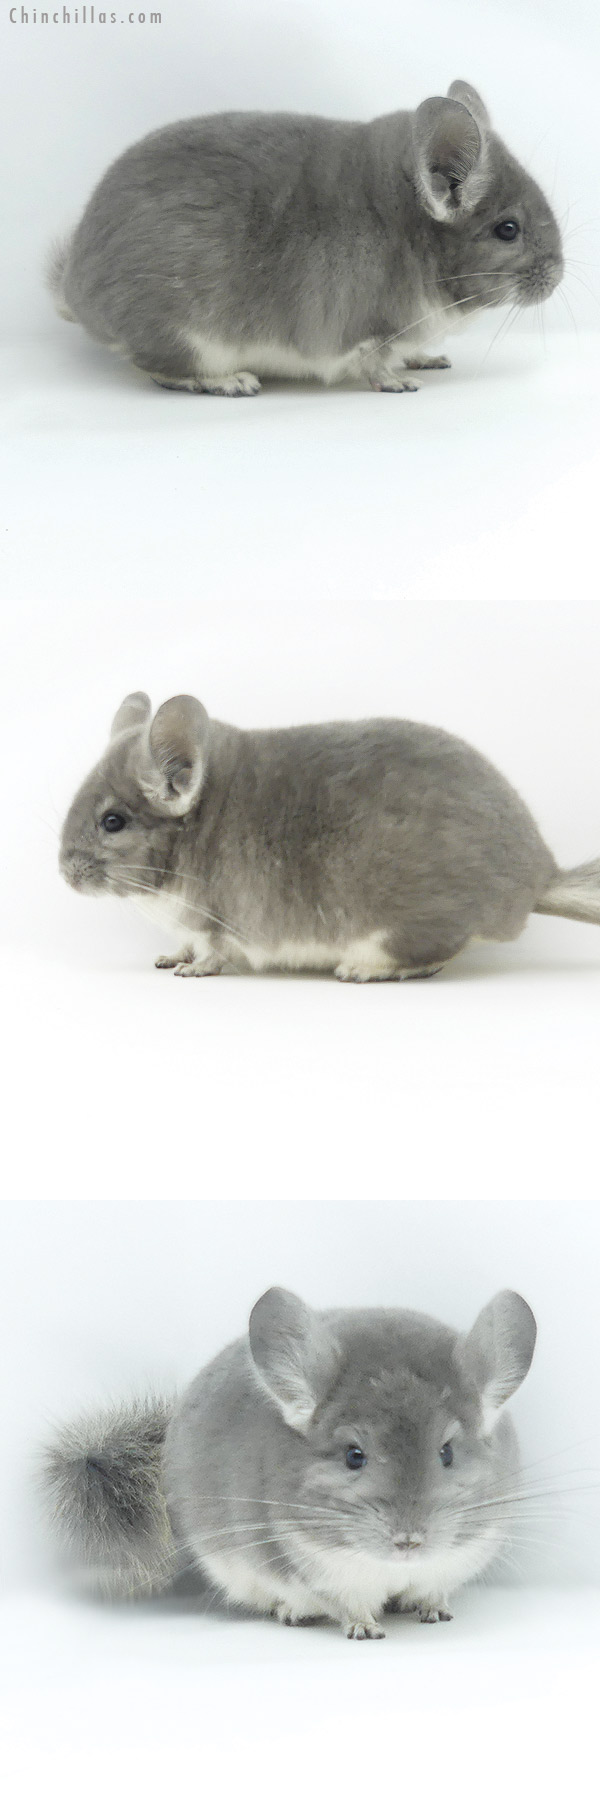 Chinchilla or related item offered for sale or export on Chinchillas.com - 19379 Blocky Show Quality Violet Male Chinchilla